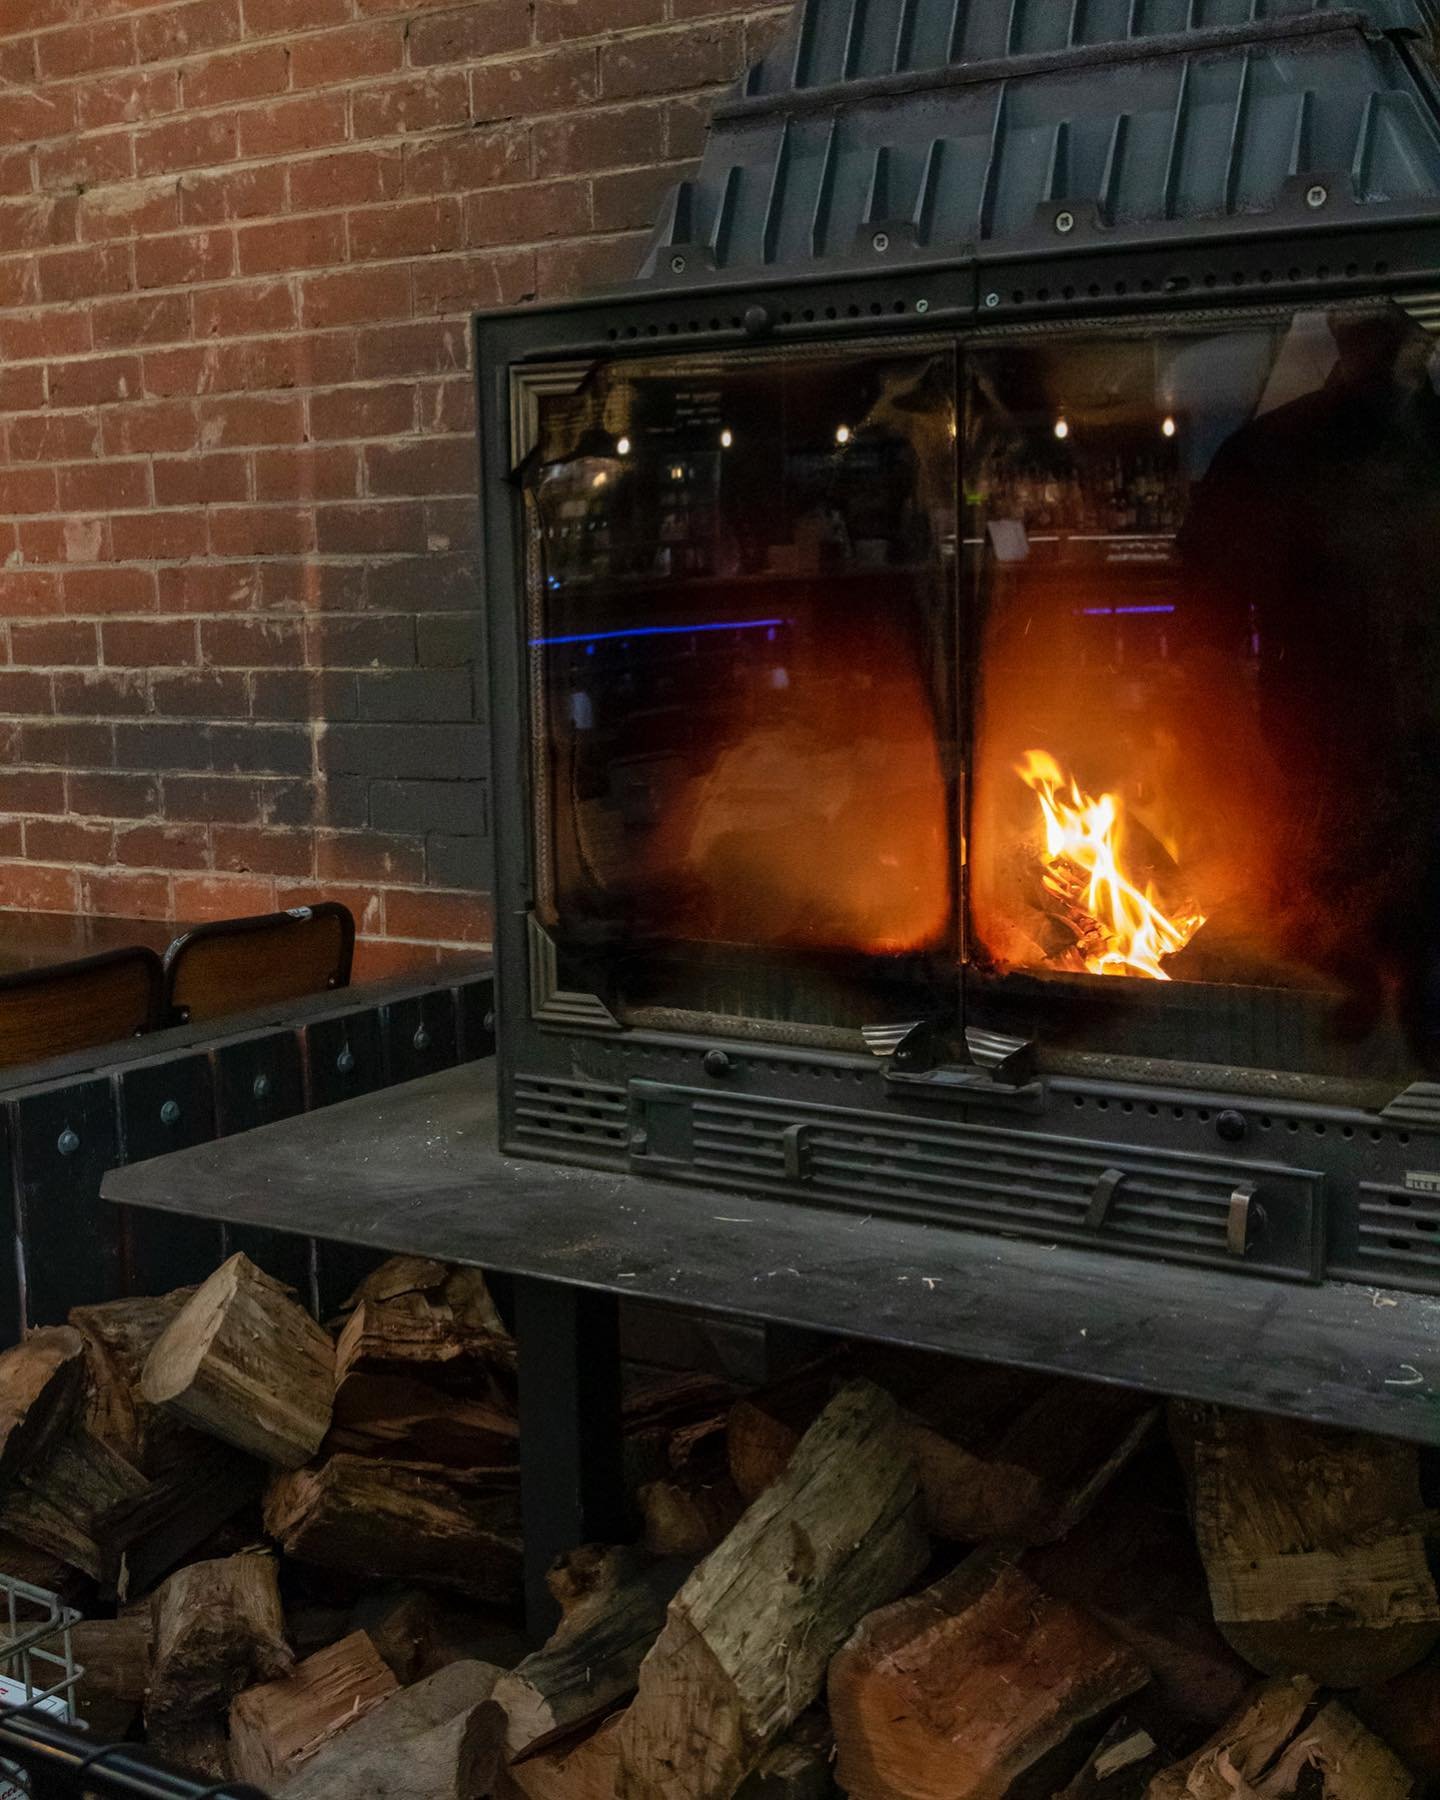 Chase away the chill at Mitcham Social 🔥

We&rsquo;ve got all things cozy&hellip; not too hot, not too cold but just right 😉 

See you this weekend! 🍻